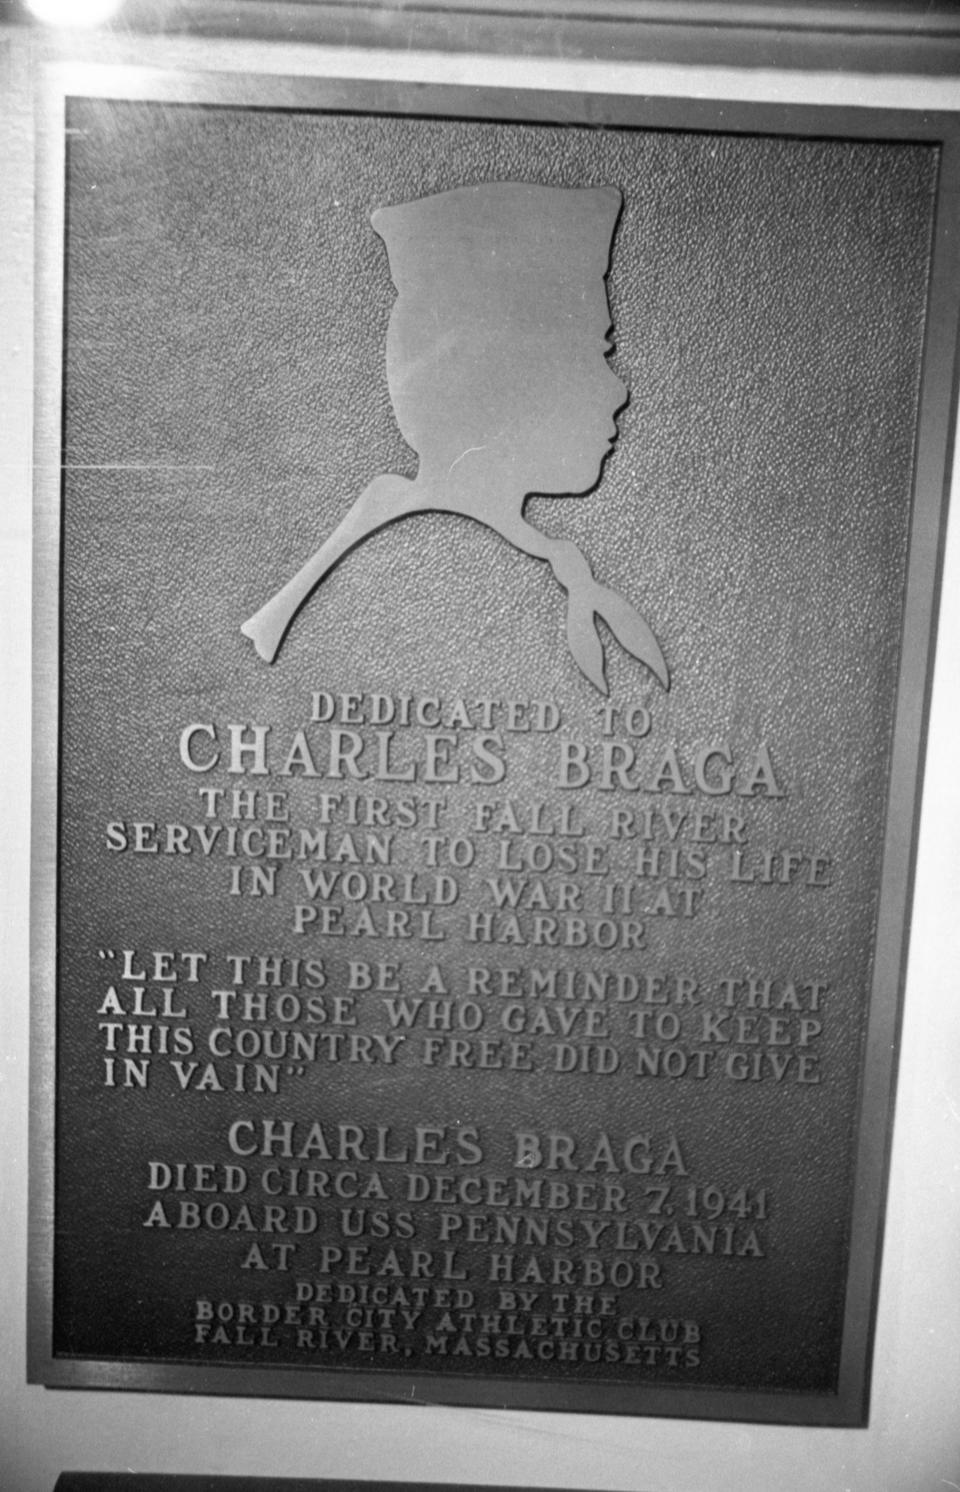 A plaque dedicated to Charles Braga is located at Battleship Cove in 1984.